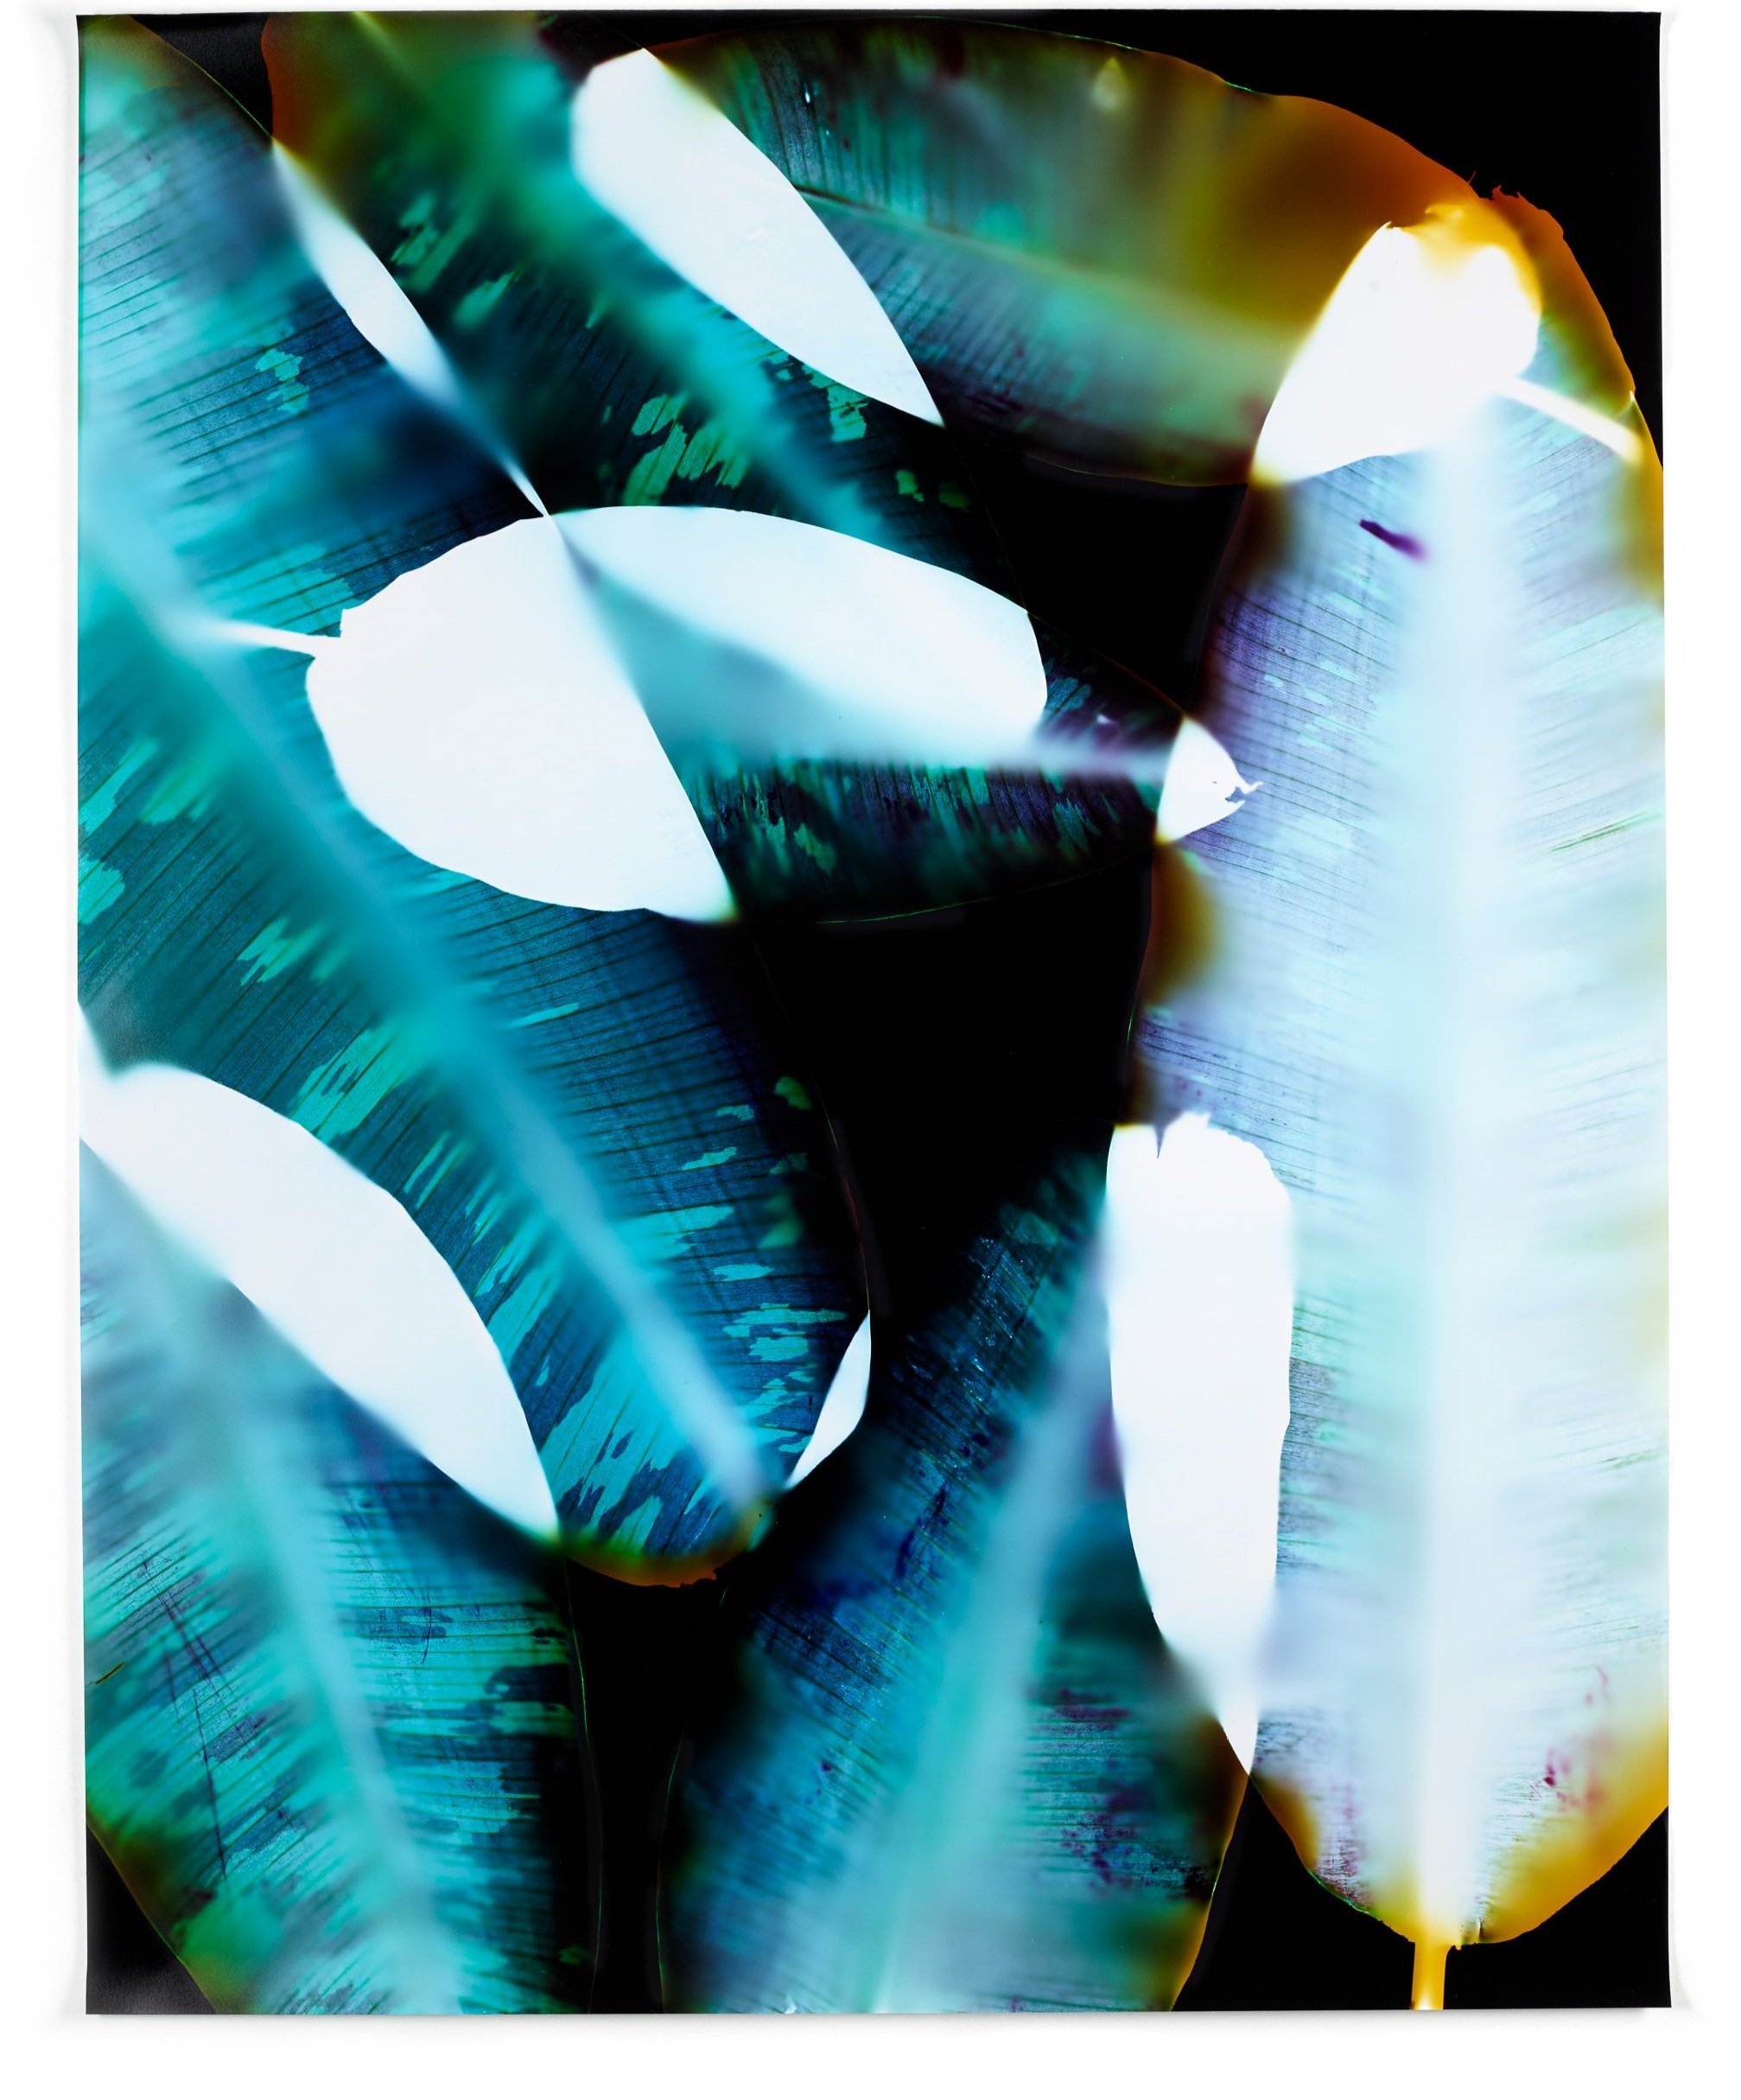   How Forests Think 1,  2014   Chromogenic photogram 40 x 32 in 